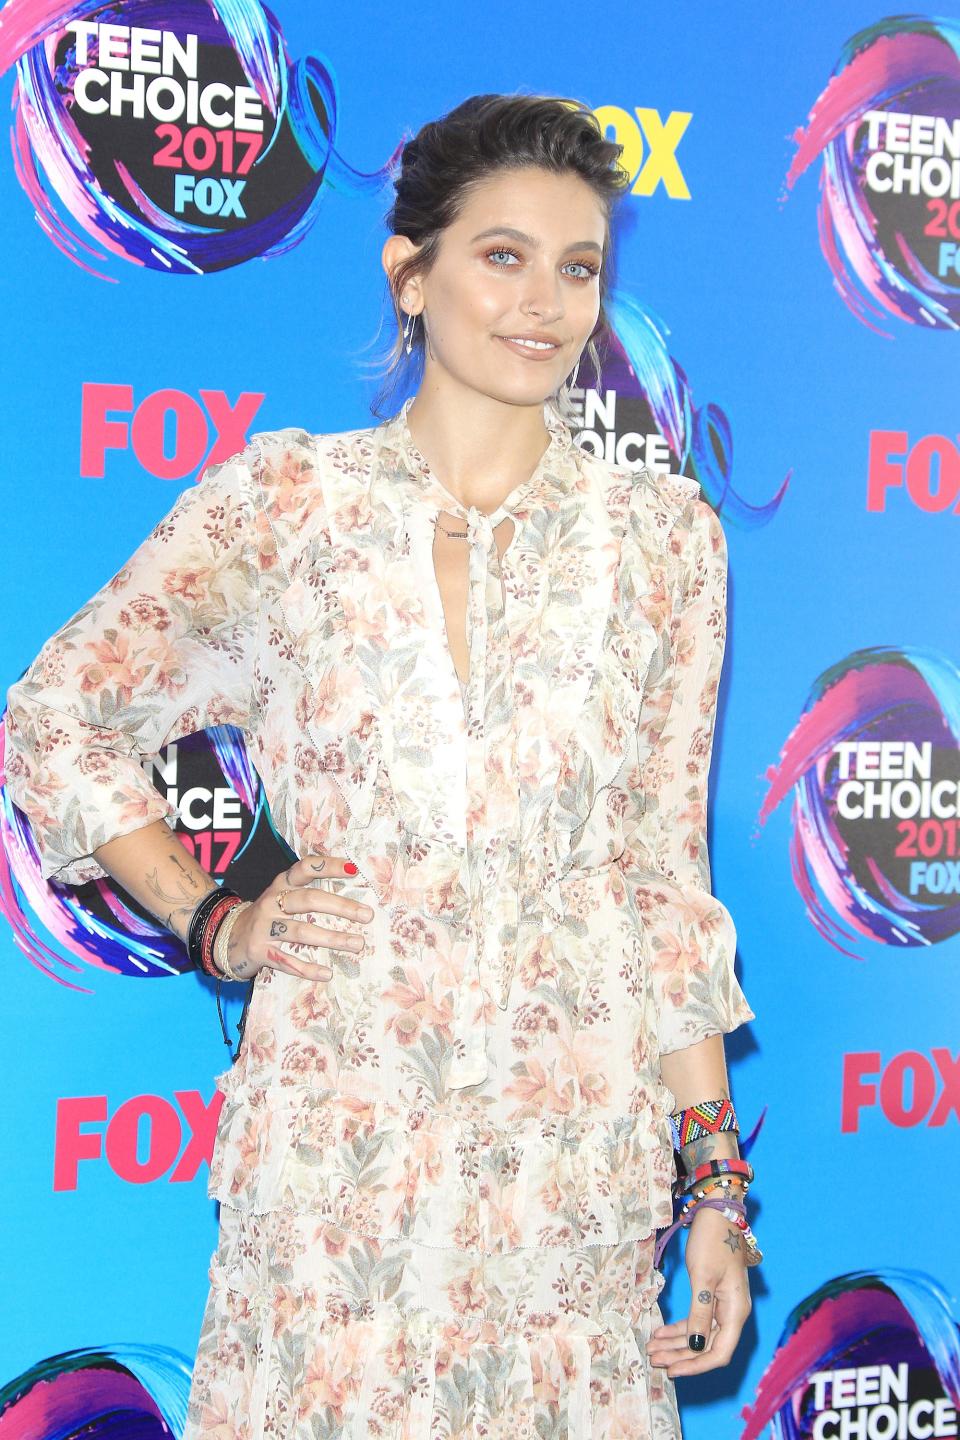 epa06143635 US model and actress Paris Jackson arrives for the Teen Choice Awards 2017 at the Galen Center in Los Angeles, California, USA, 13 August 2017. The Teen Choice Awards celebrate teen icons in film, TV, music, sports, fashion and the web. EFE/NINA PROMMER